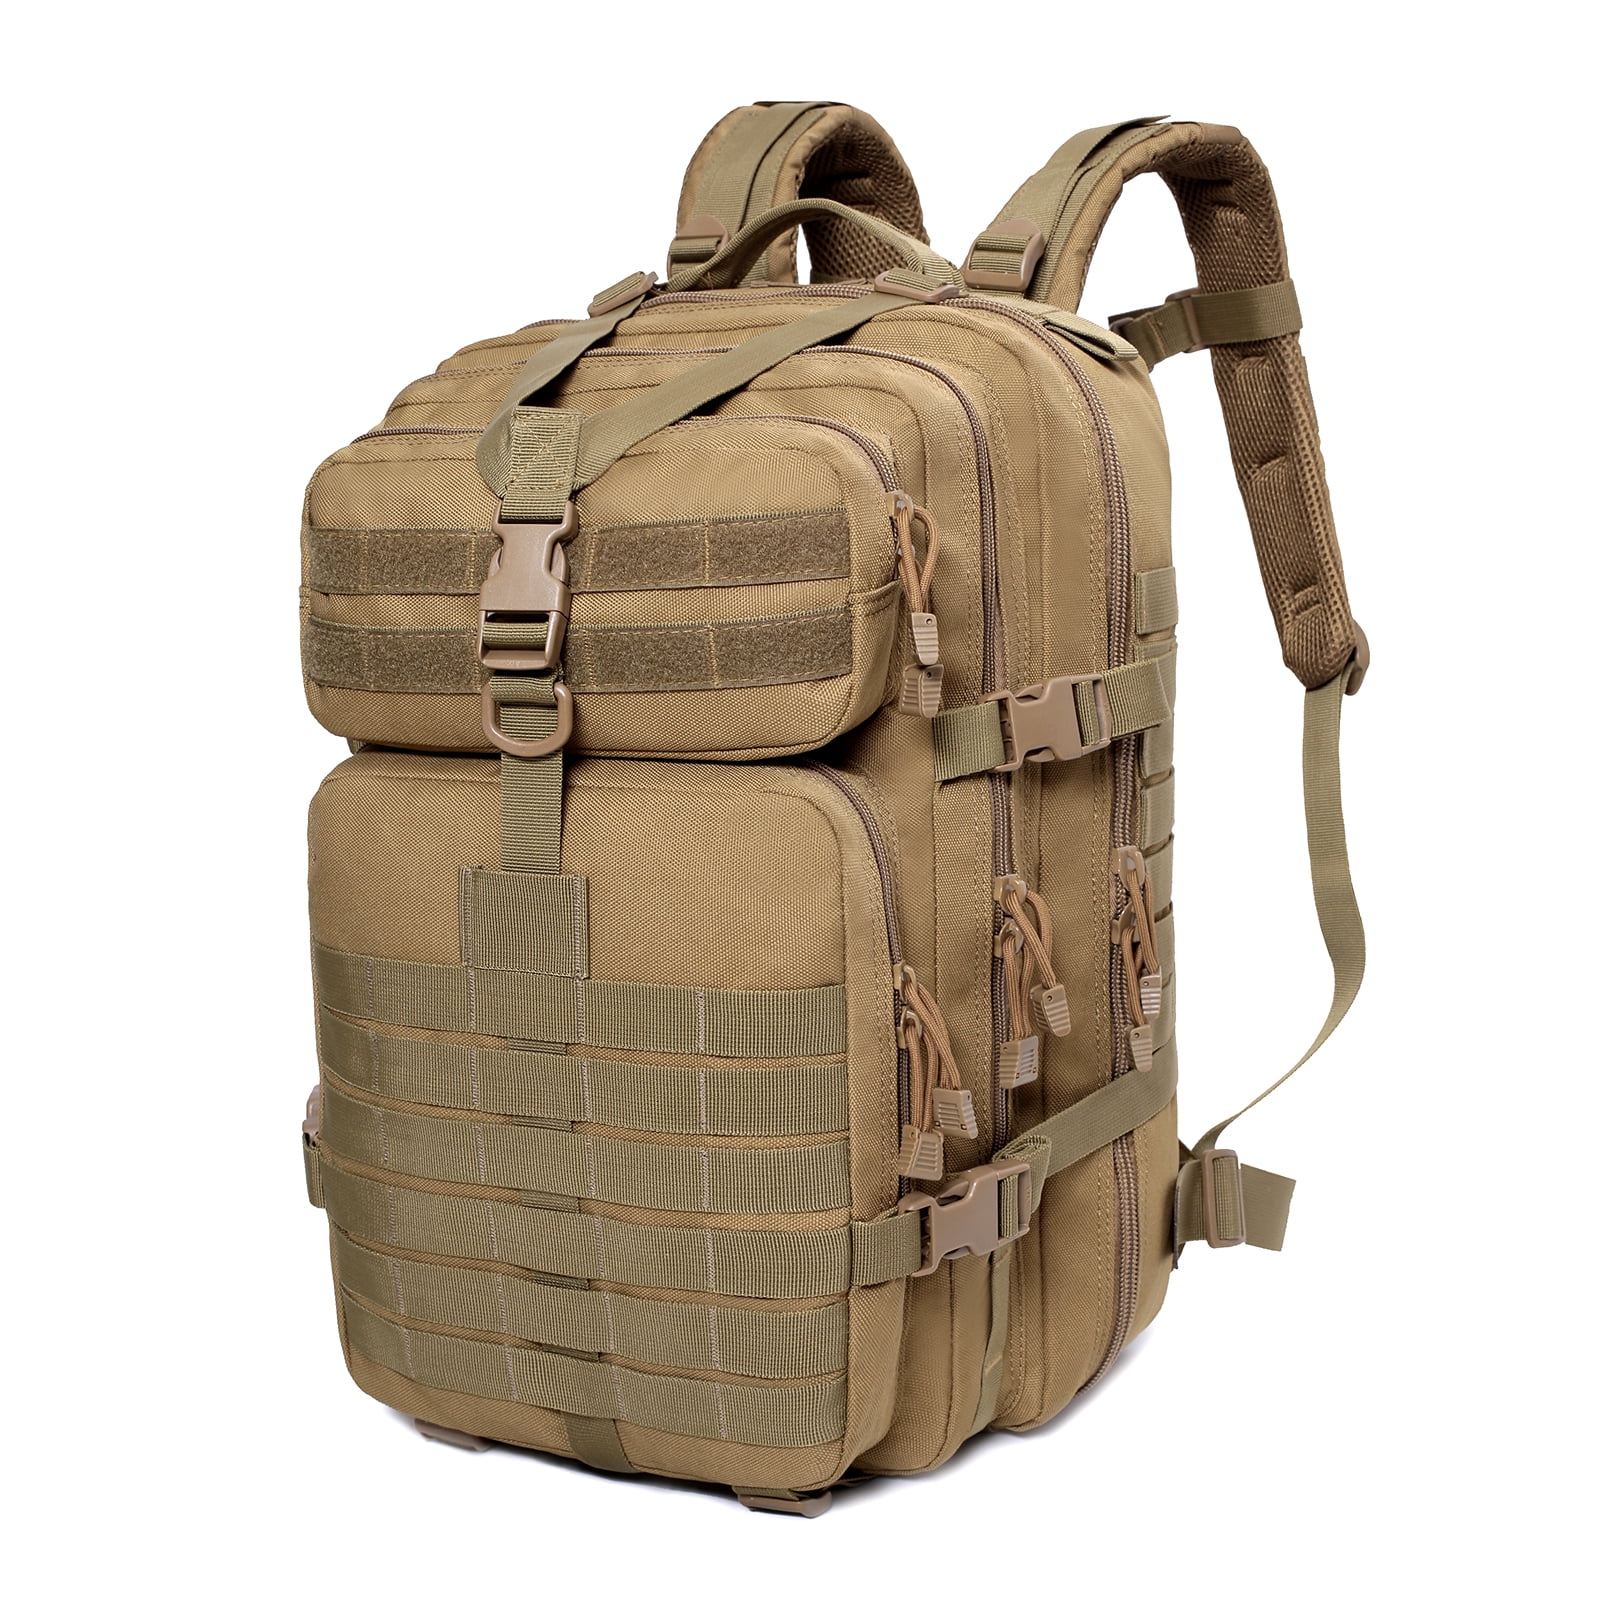 40L Outdoor Military Rucksacks Tactical Backpack 3 Day Assault Molle Bag Hiking